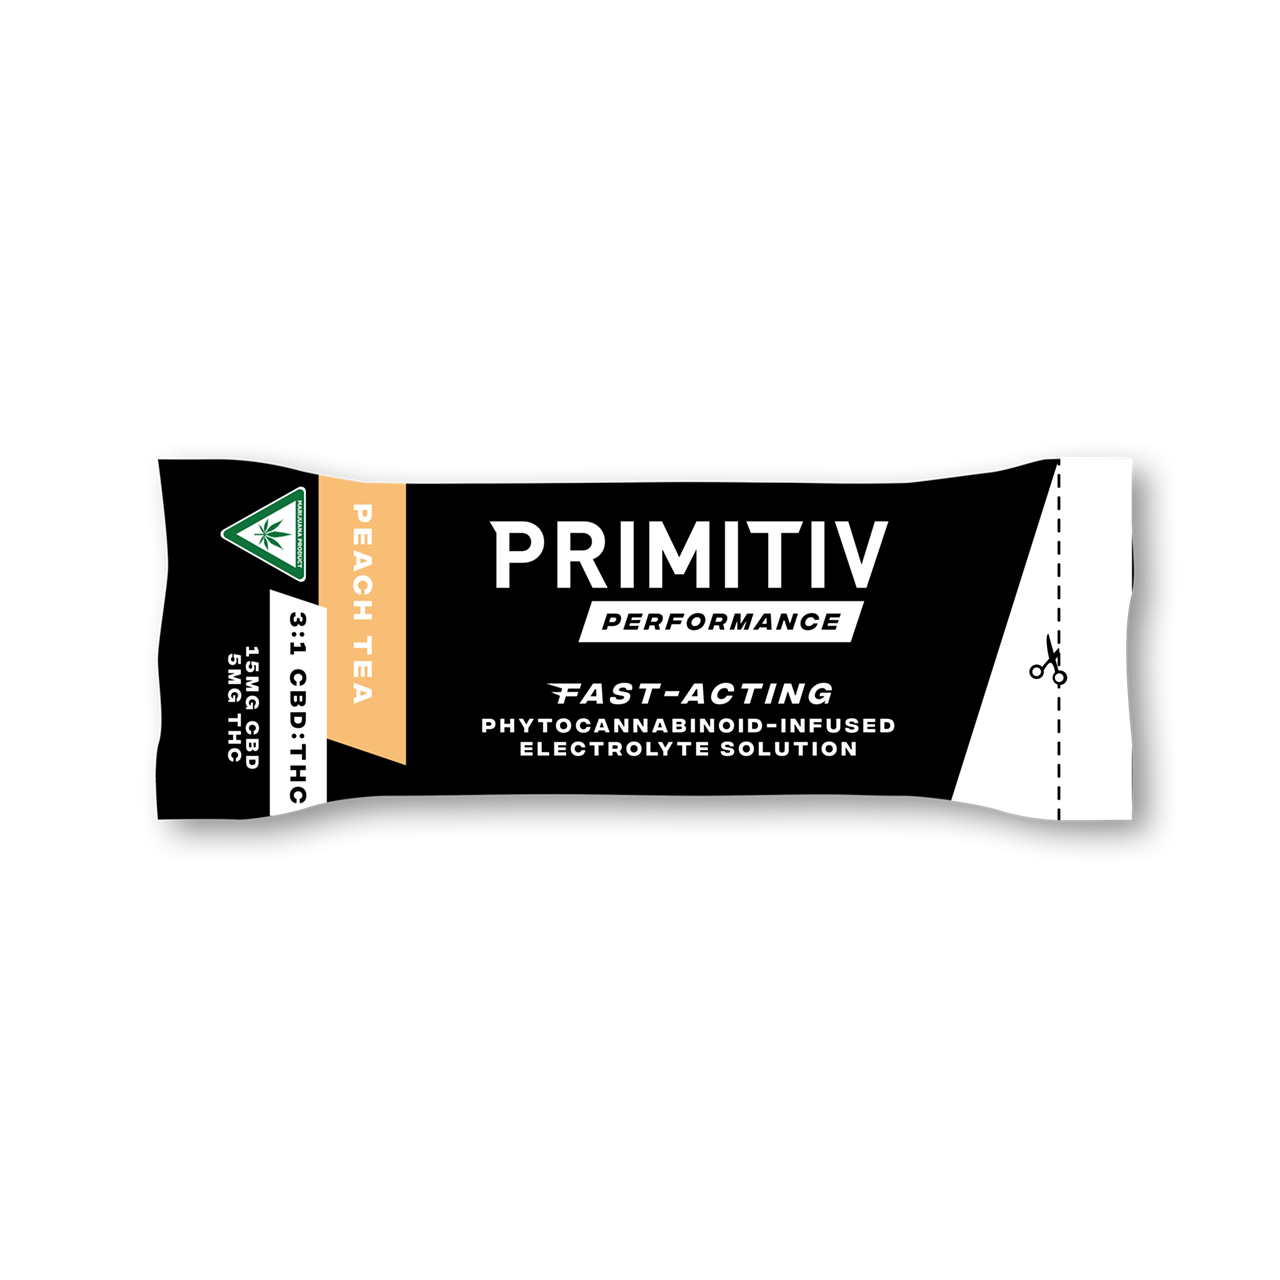 Primitiv Performance’s Oral Rehydration Solution (Primitiv)
primitivgroup.com 
These powdered drink mixes are ideal for low-key cannabis consumption. You just mix one packet in water just like any other powdered drink mix, making them easy to take on the go. They come in four flavors, with the Peach Tea’s 3:1 CBD:THC ratio perfect for those looking for a lower high.